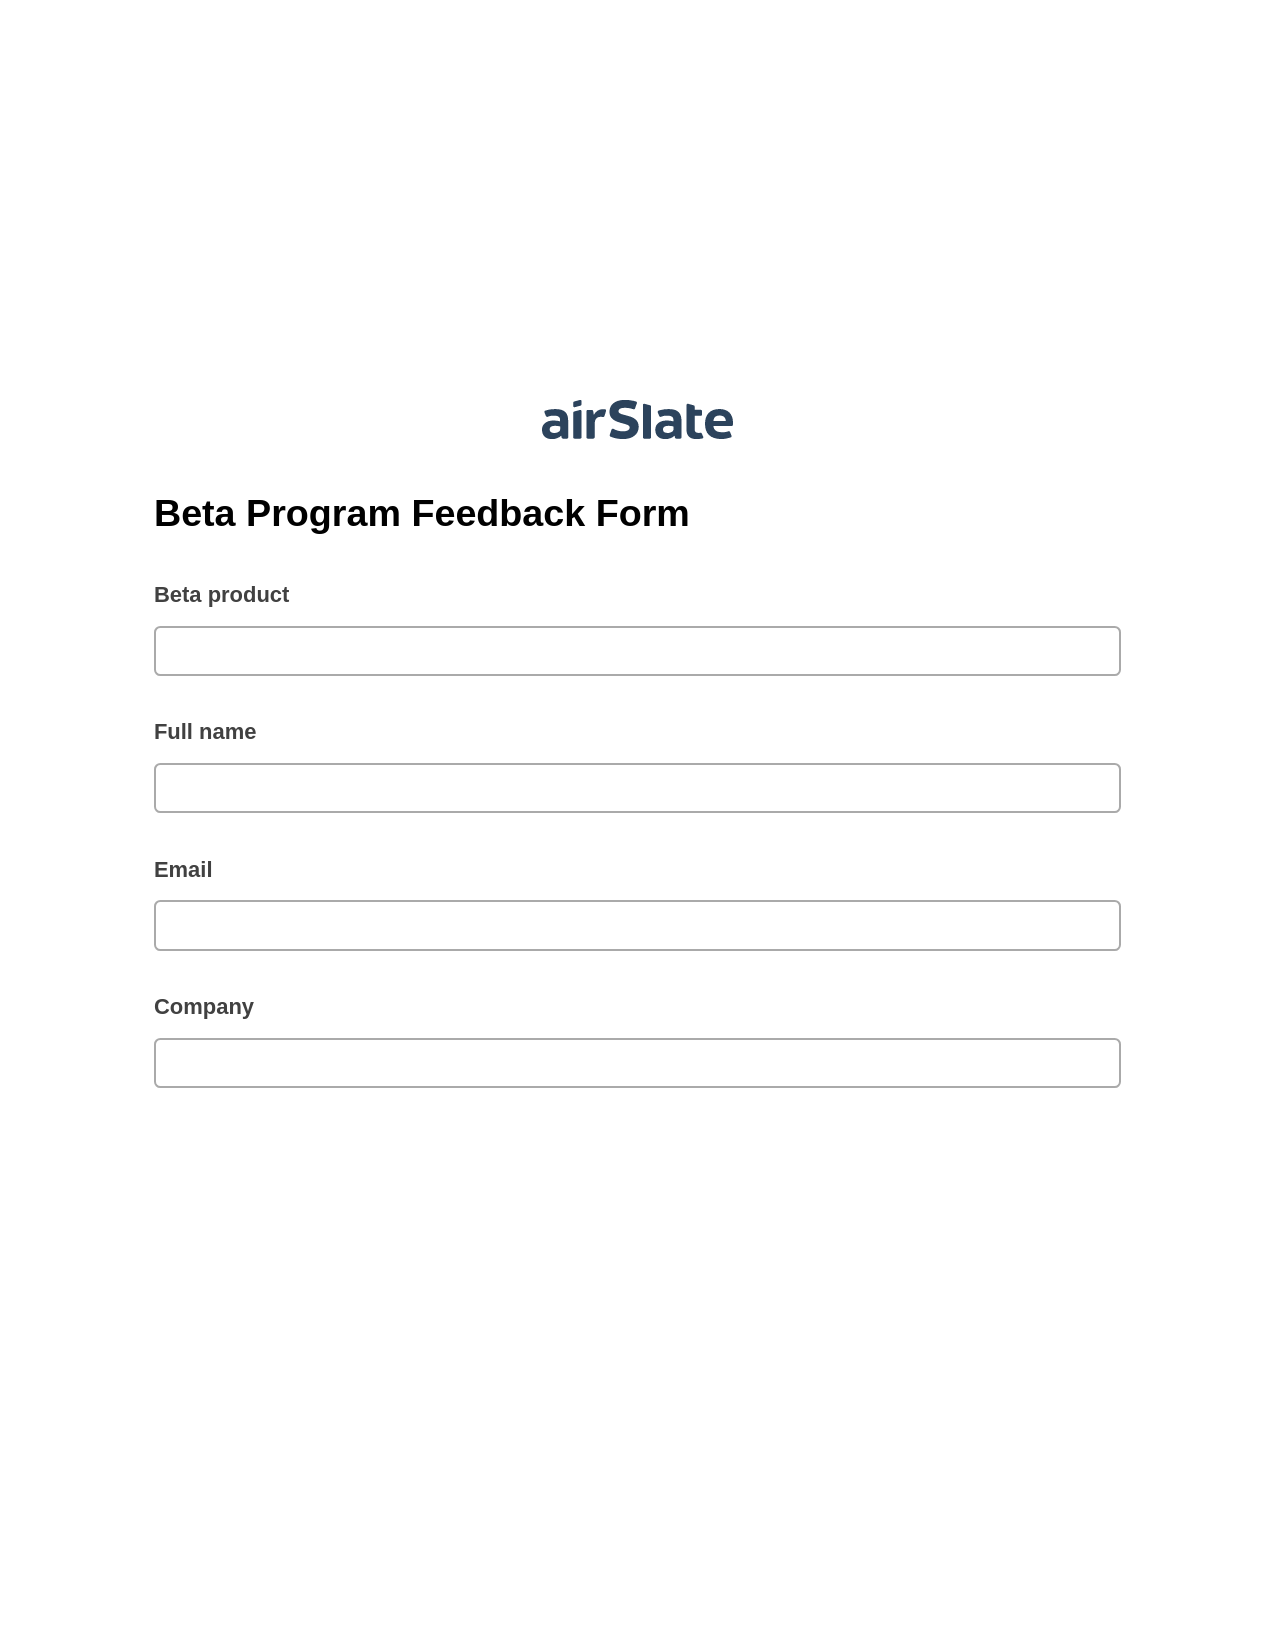 Beta Program Feedback Form Pre-fill from NetSuite Records Bot, Webhook Bot, Email Notification Postfinish Bot